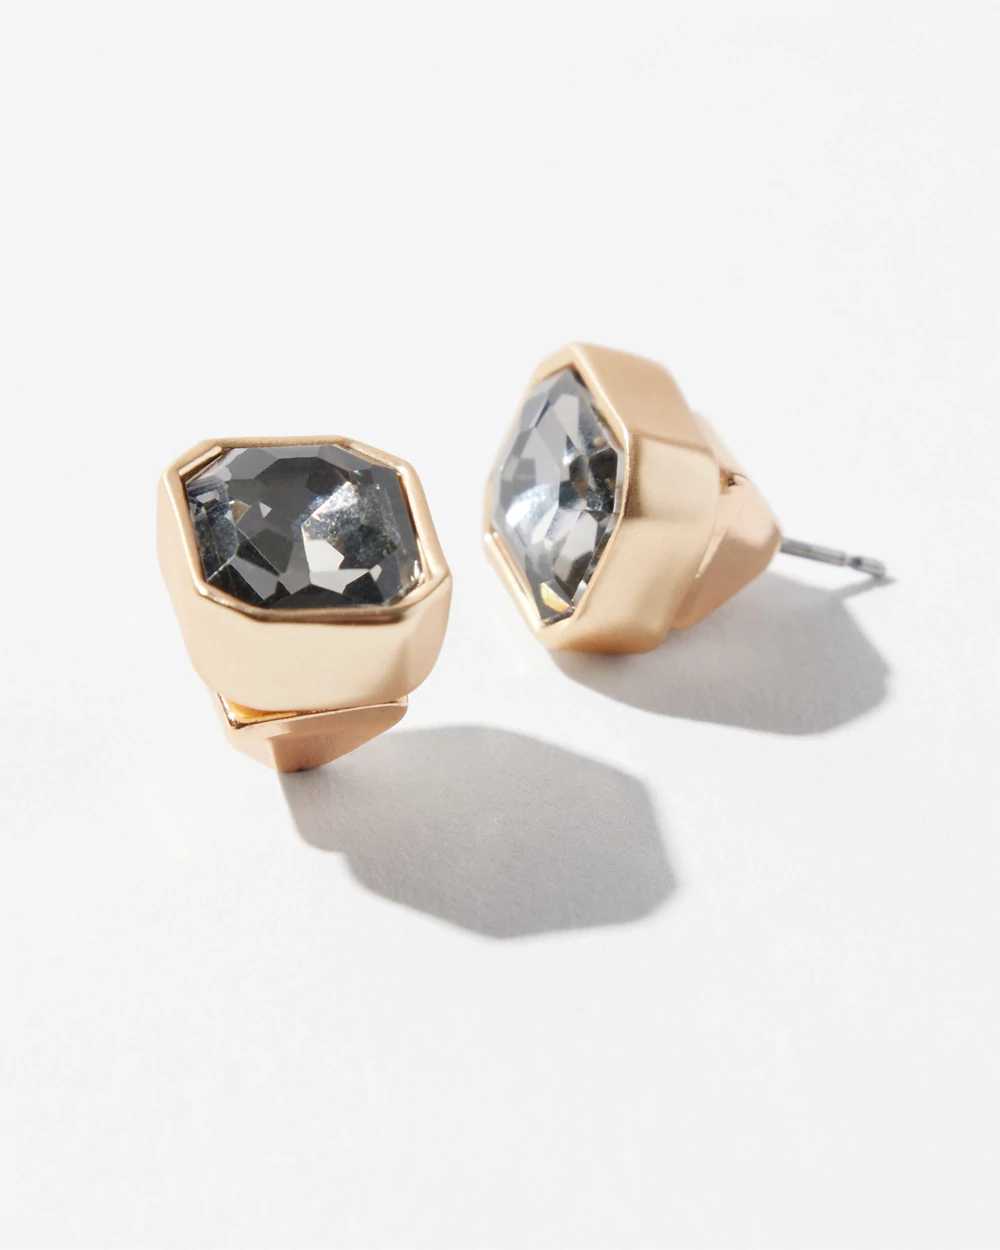 Gold Black Crystal Stud Earrings click to view larger image.